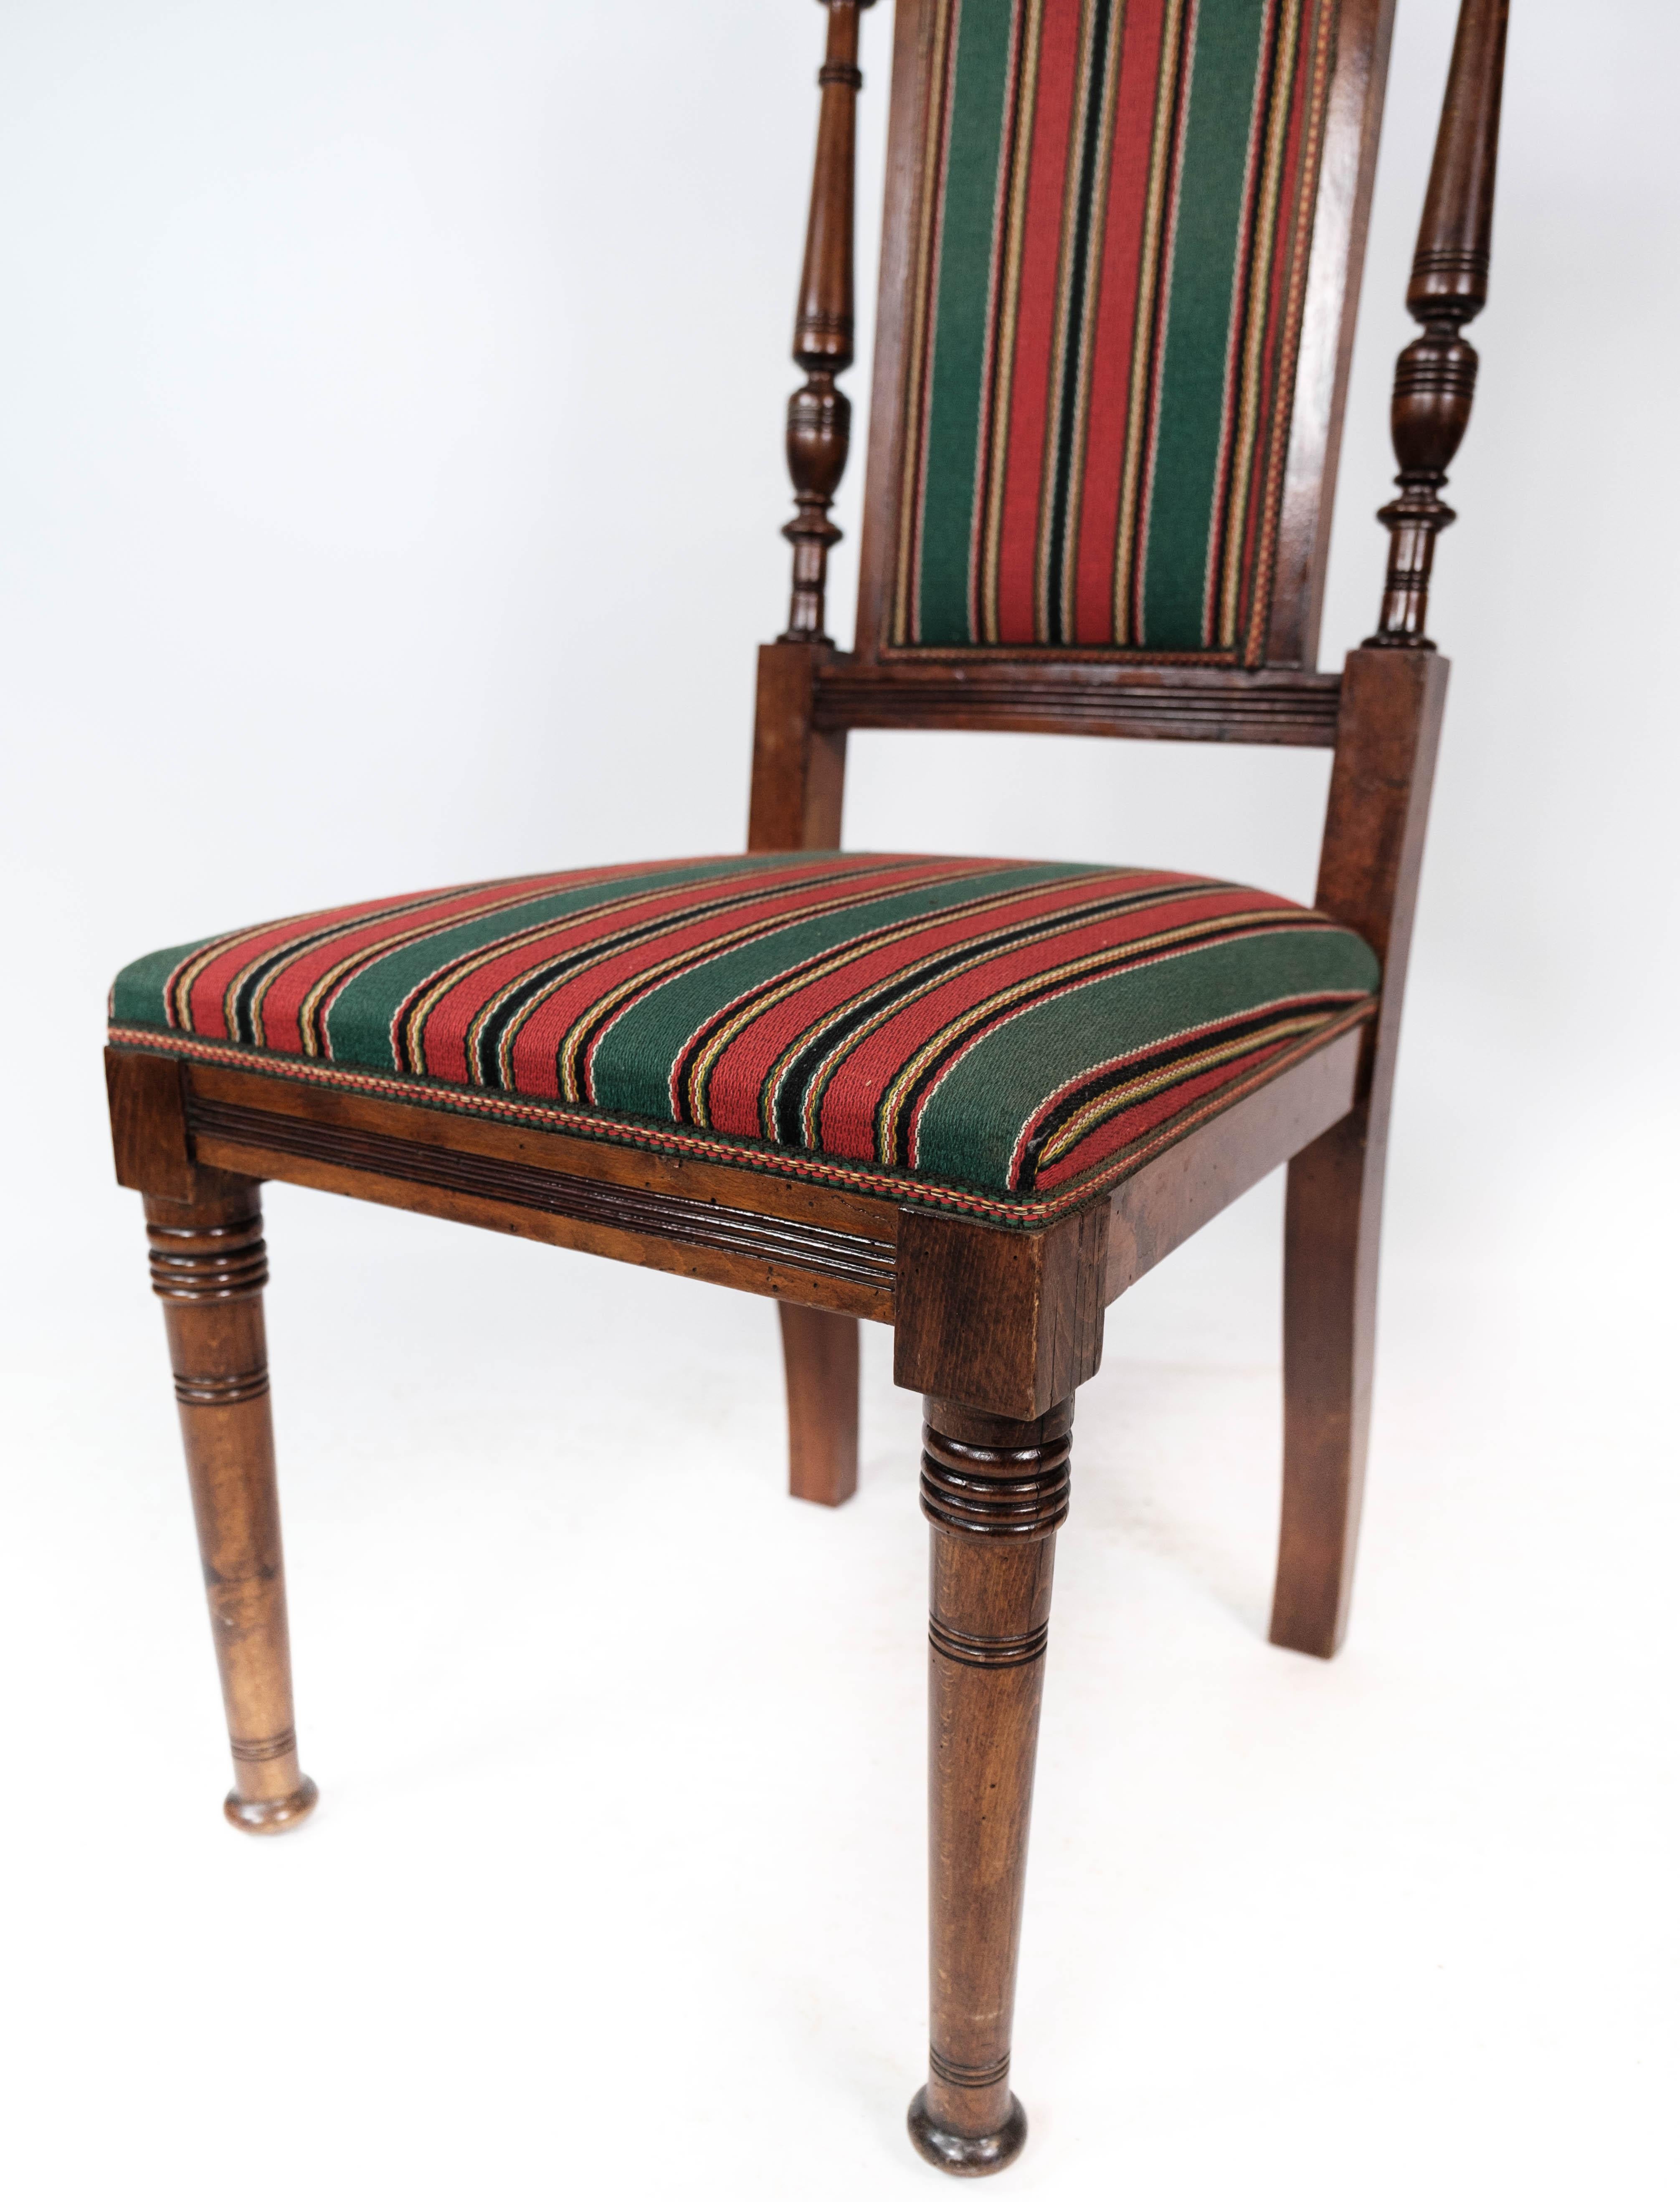 Set of Six Dining Room Chairs of Oak and Upholstered with Striped Fabric, 1920s For Sale 1